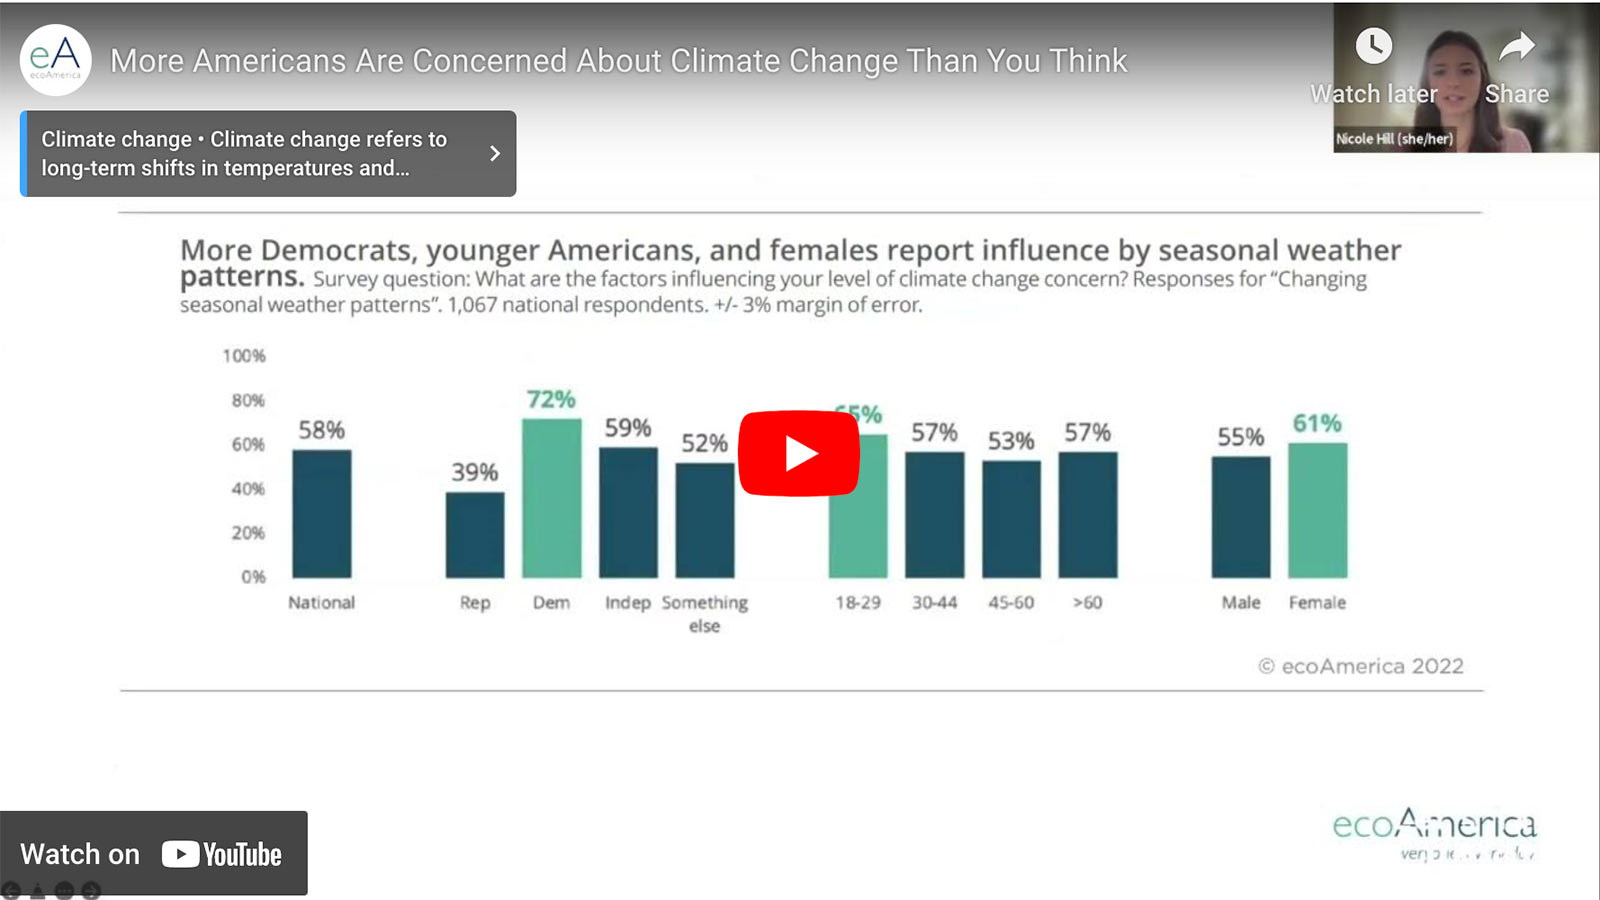 More Americans Are Concerned About Climate Change Than You Think